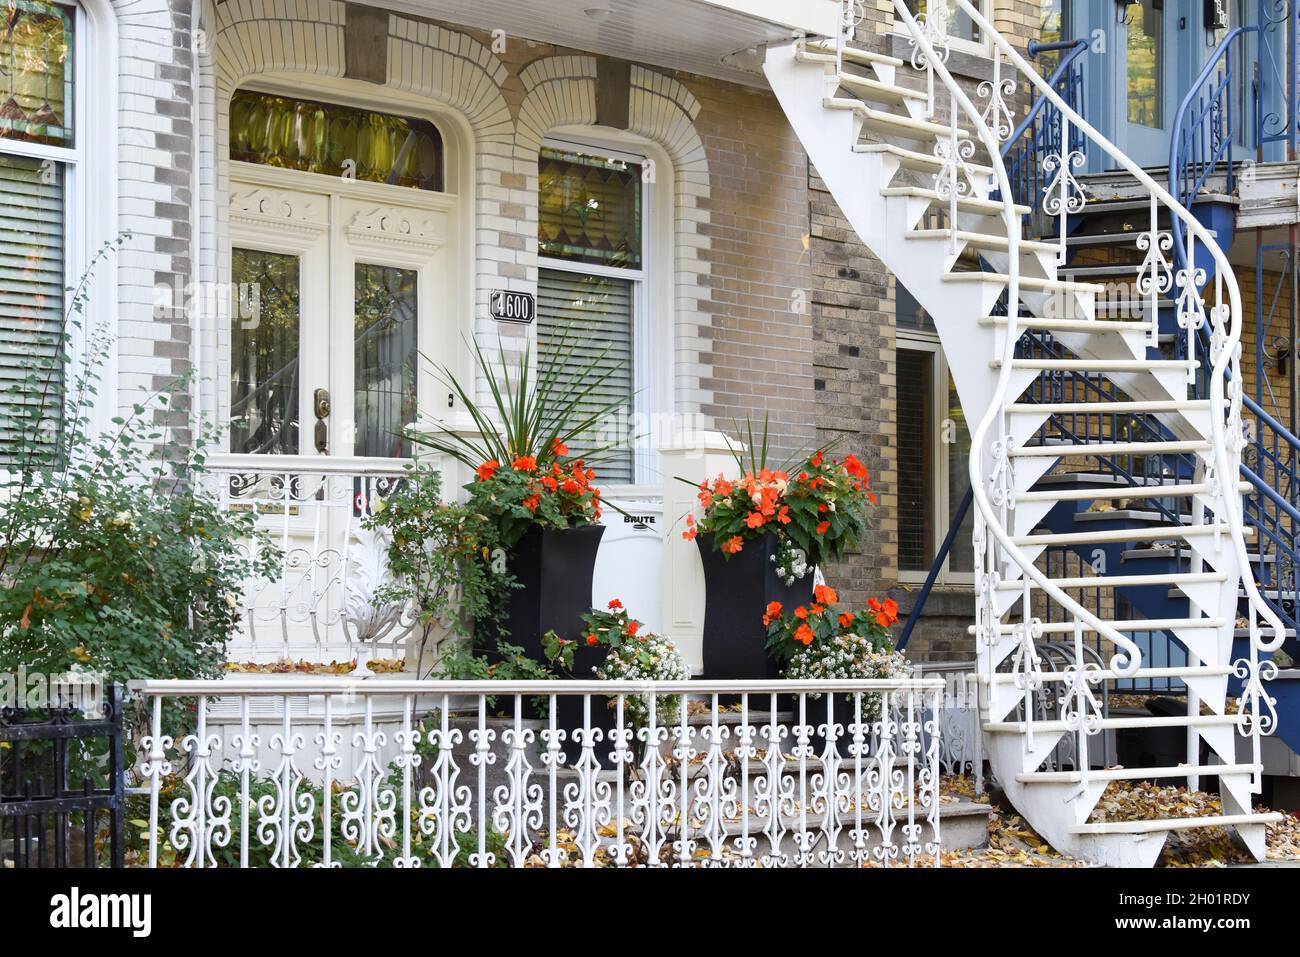 Typical house with exterior staircase in PLateau Mont Royal , Montreal Canada Stock Photo